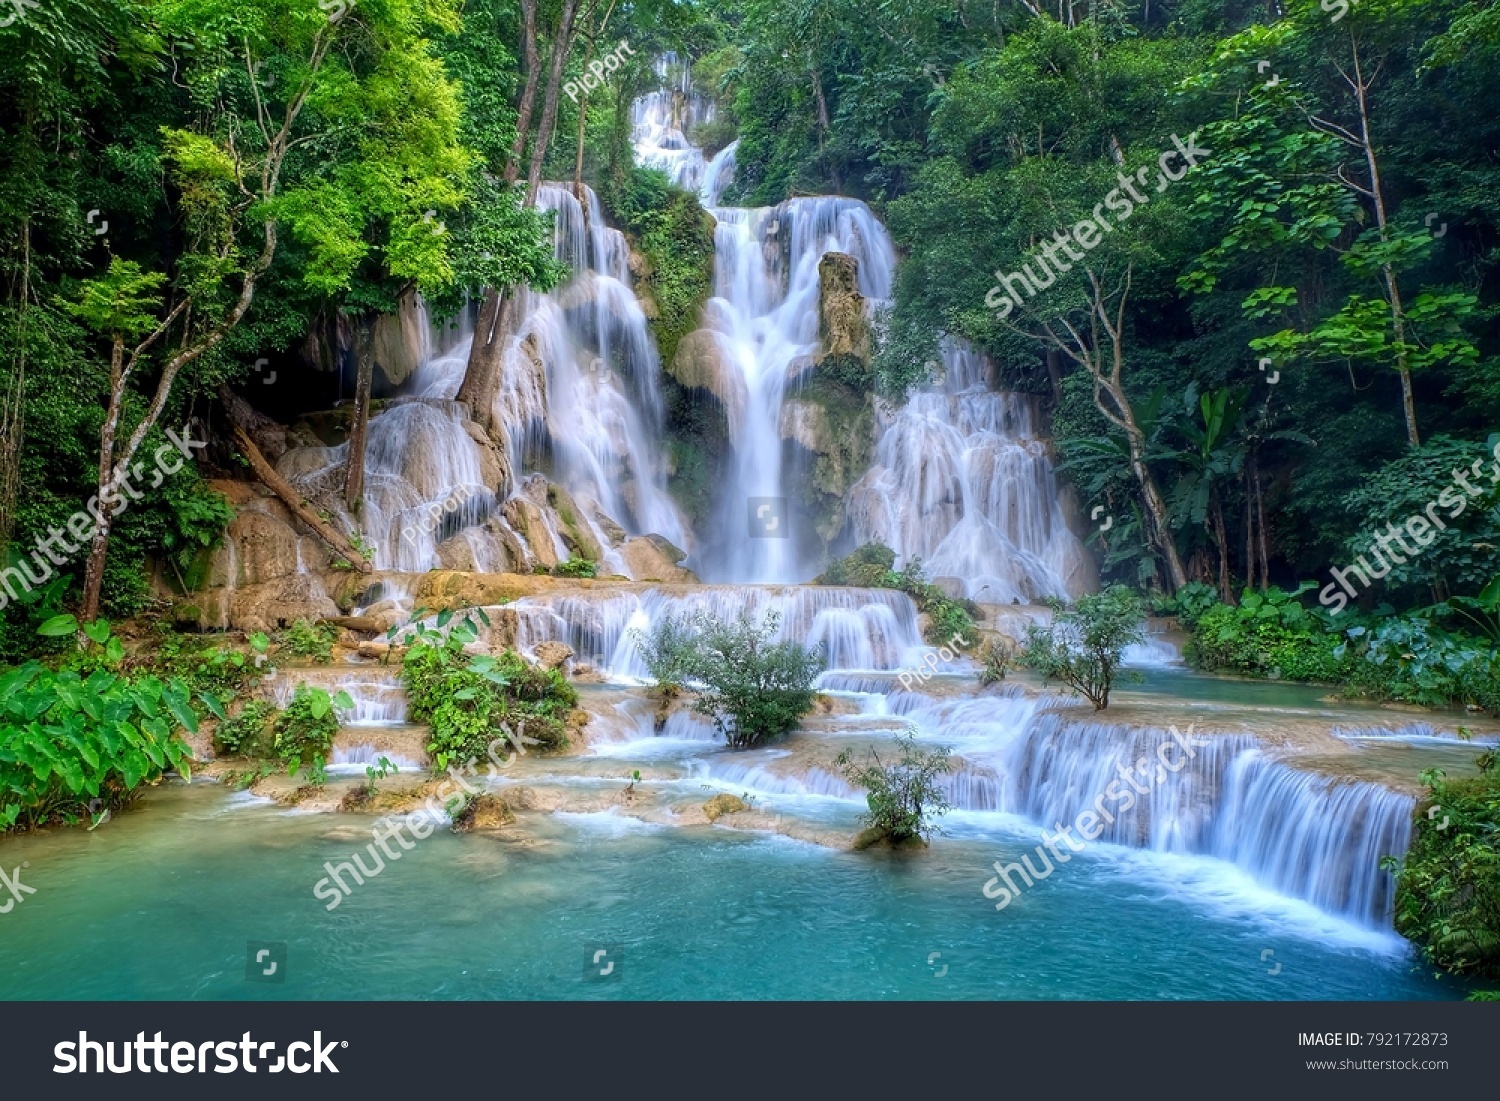 Kuang si waterfall: The beauty of nature #792172873